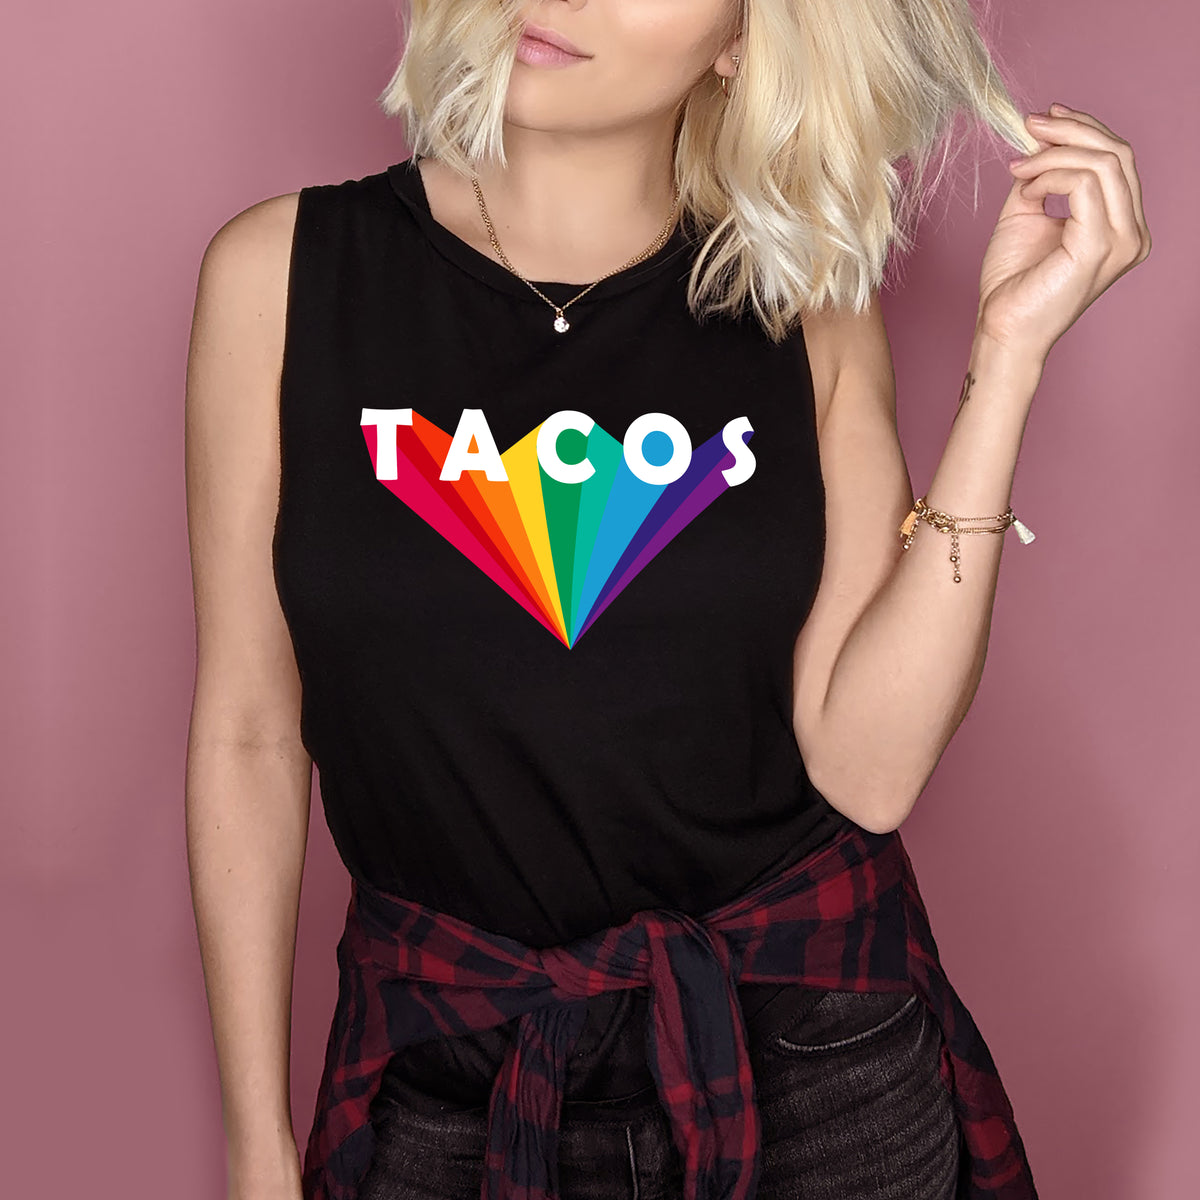 Black muscle tank hat says tacos in the retro font - HighCiti